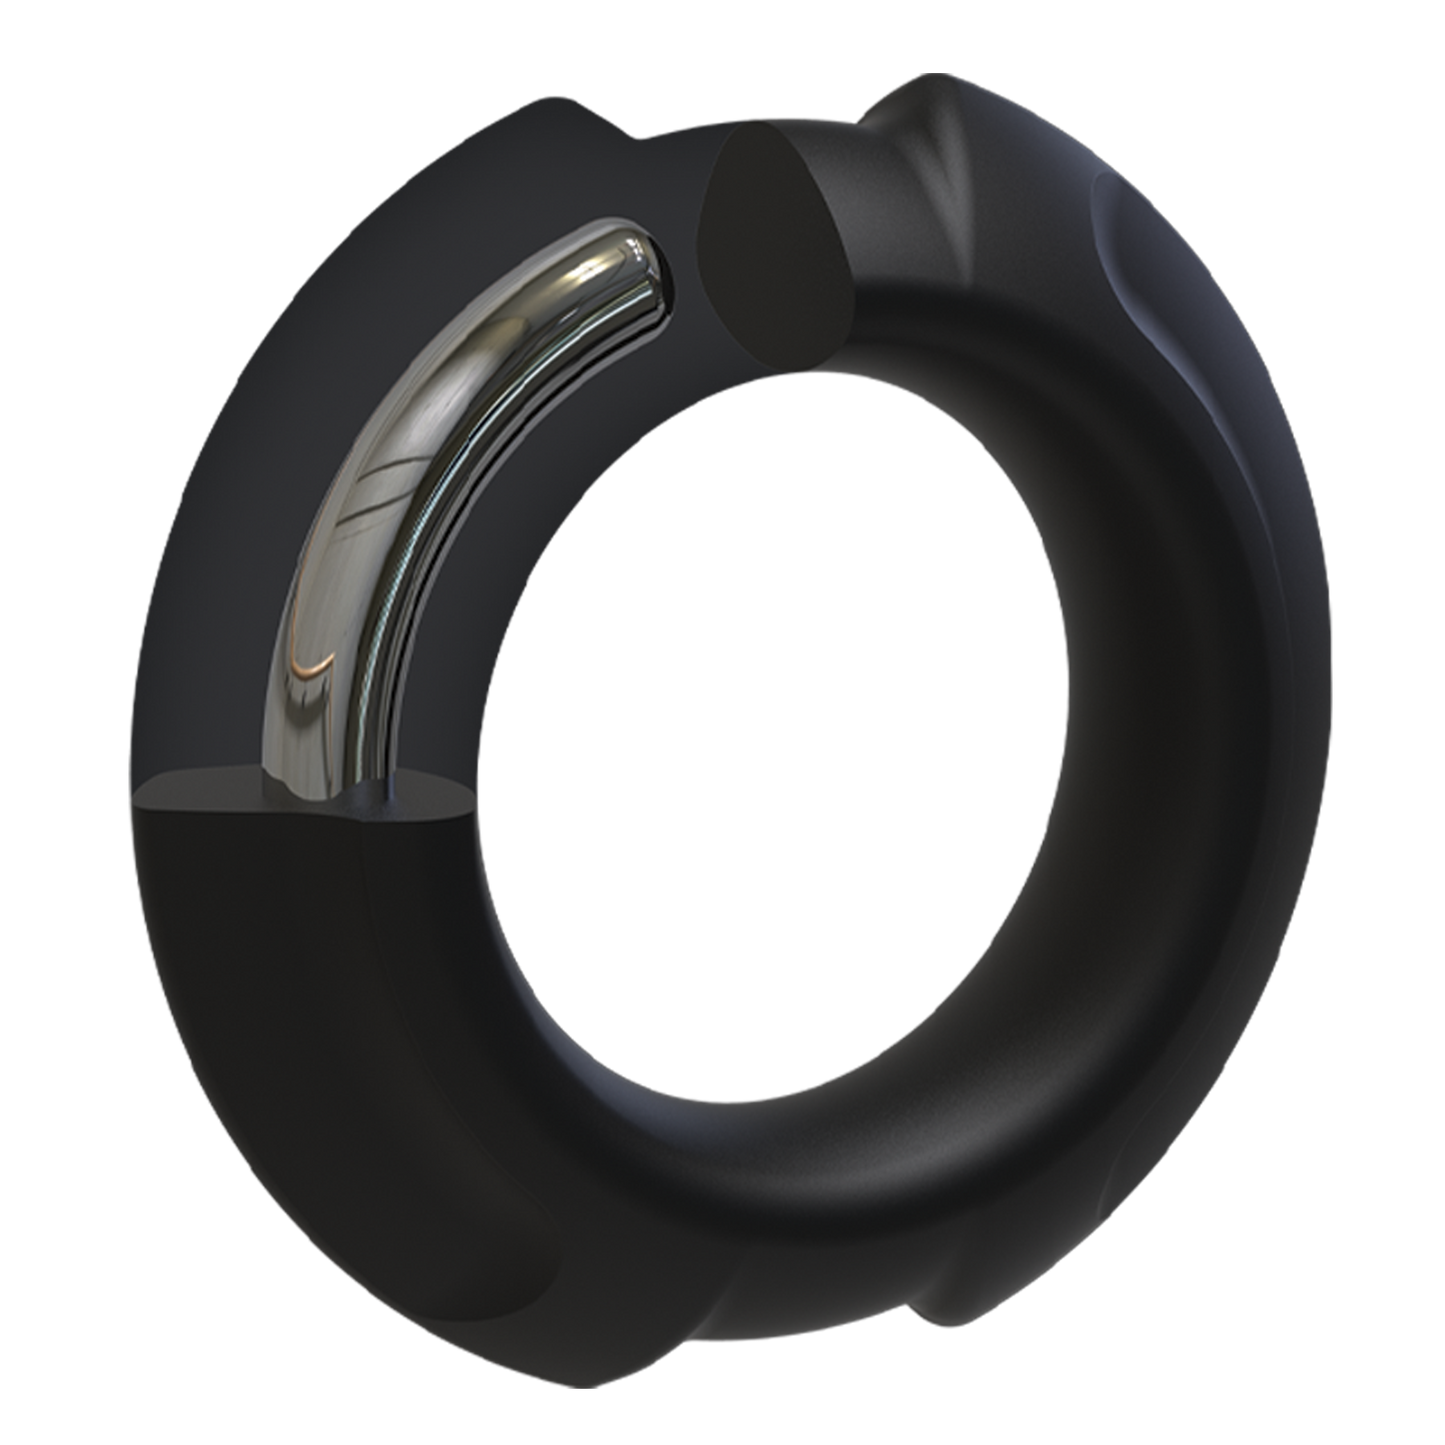 OptiMALE FlexiSteel Silicone C-Ring - 35mm, Black - Thorn & Feather